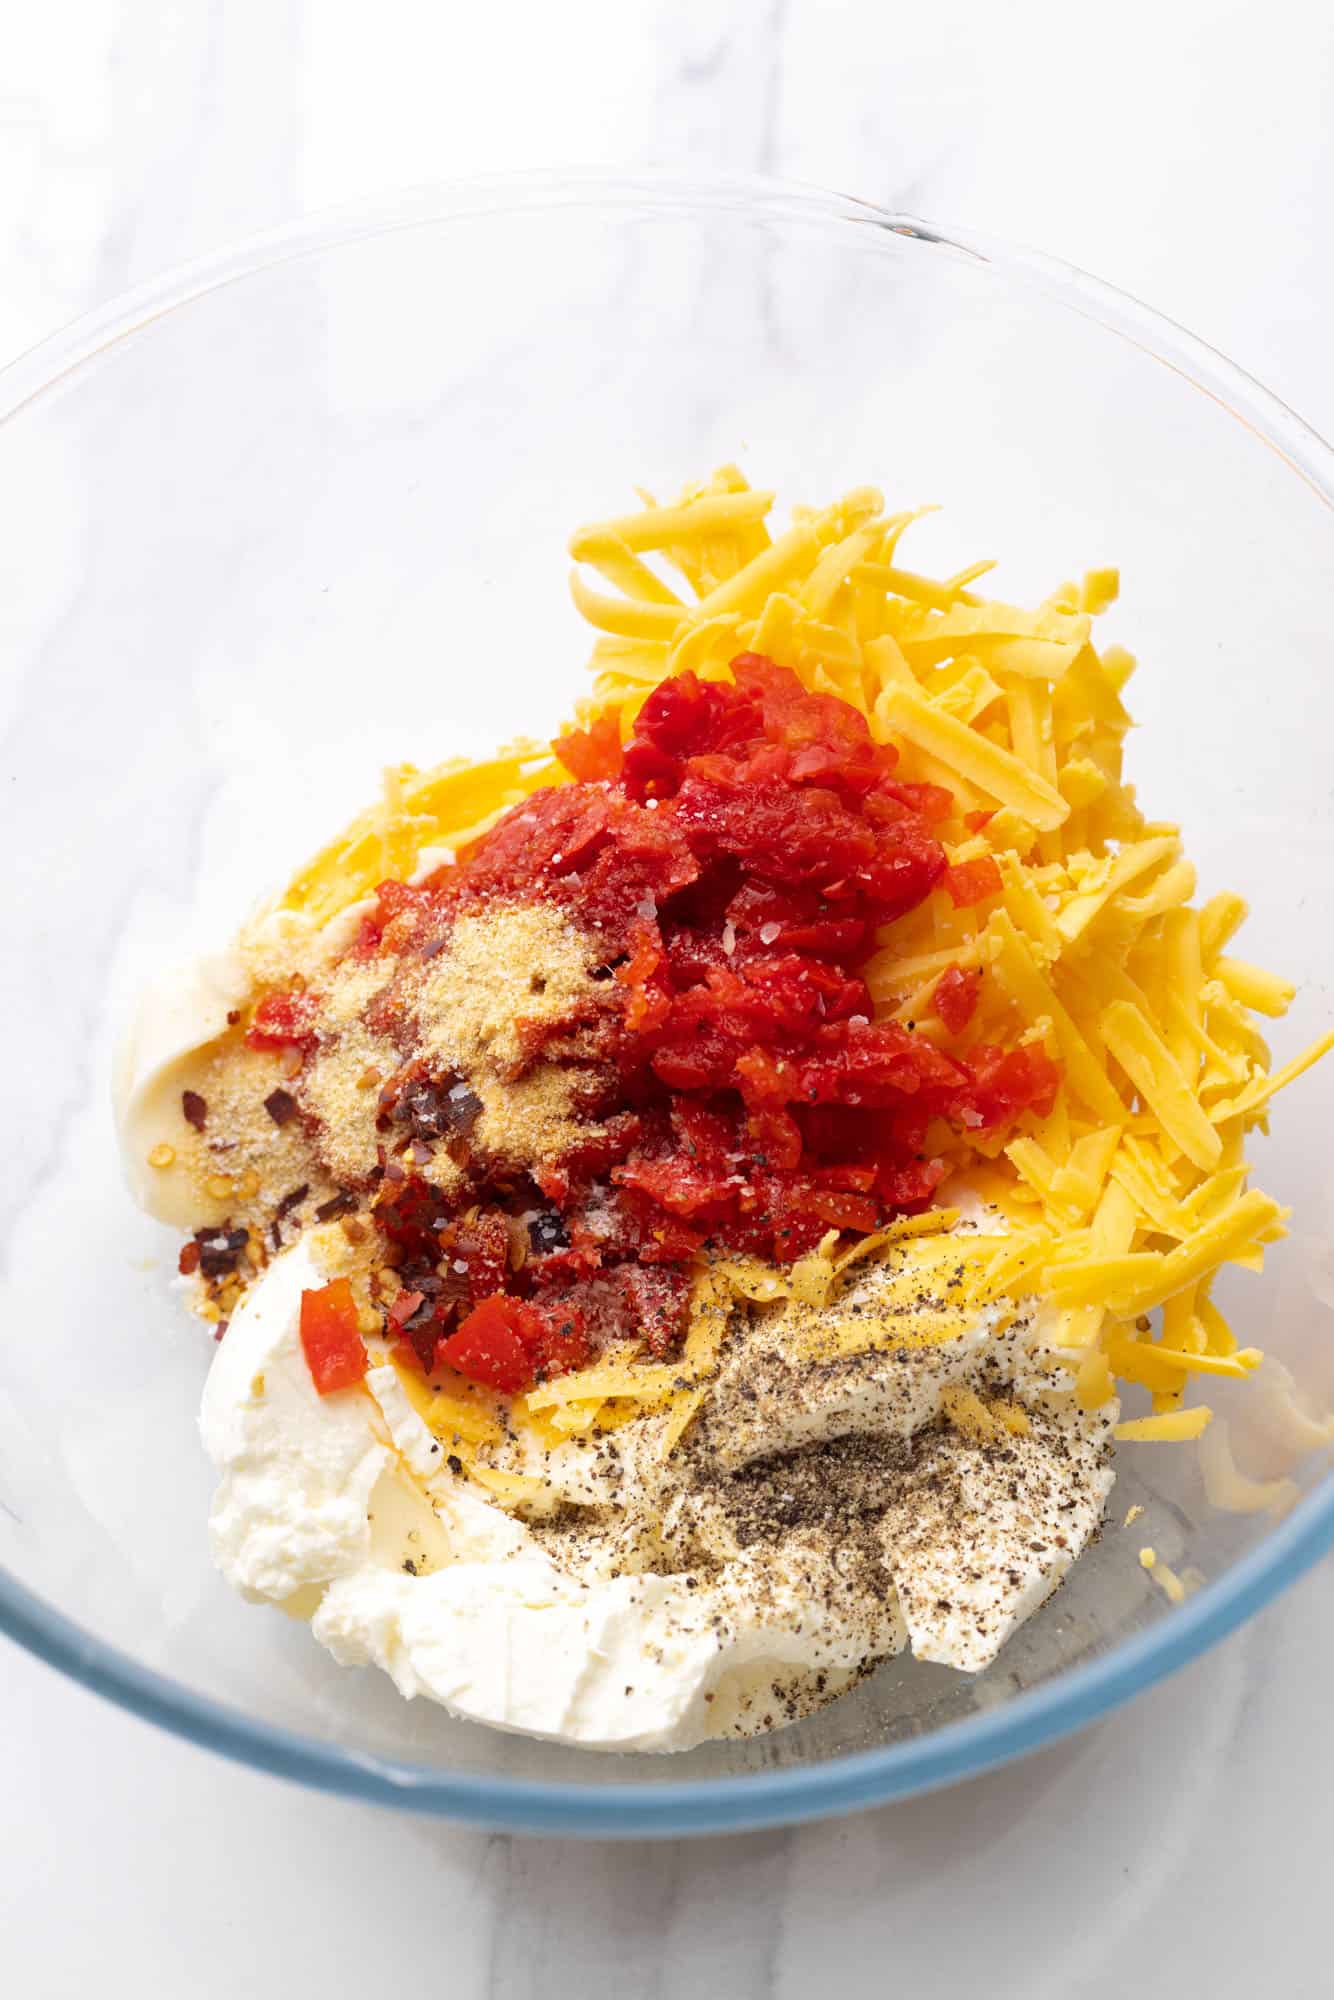 The ingredients to make pimento cheese in a glass mixing bowl